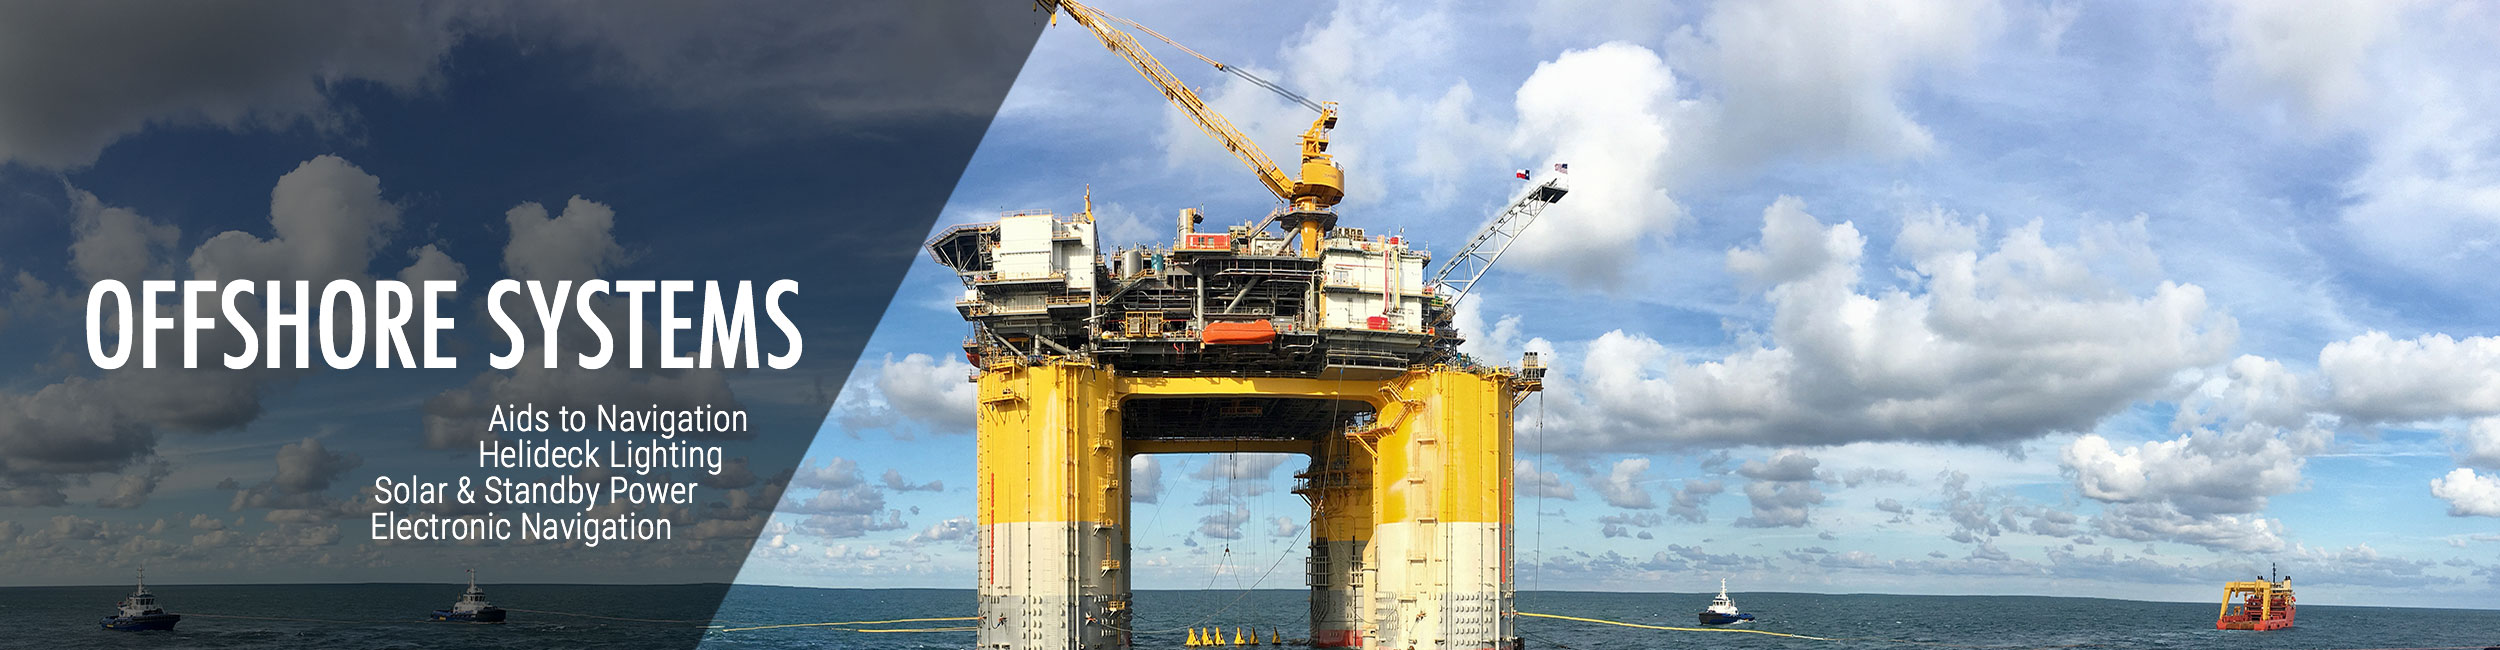 Offshore Systems